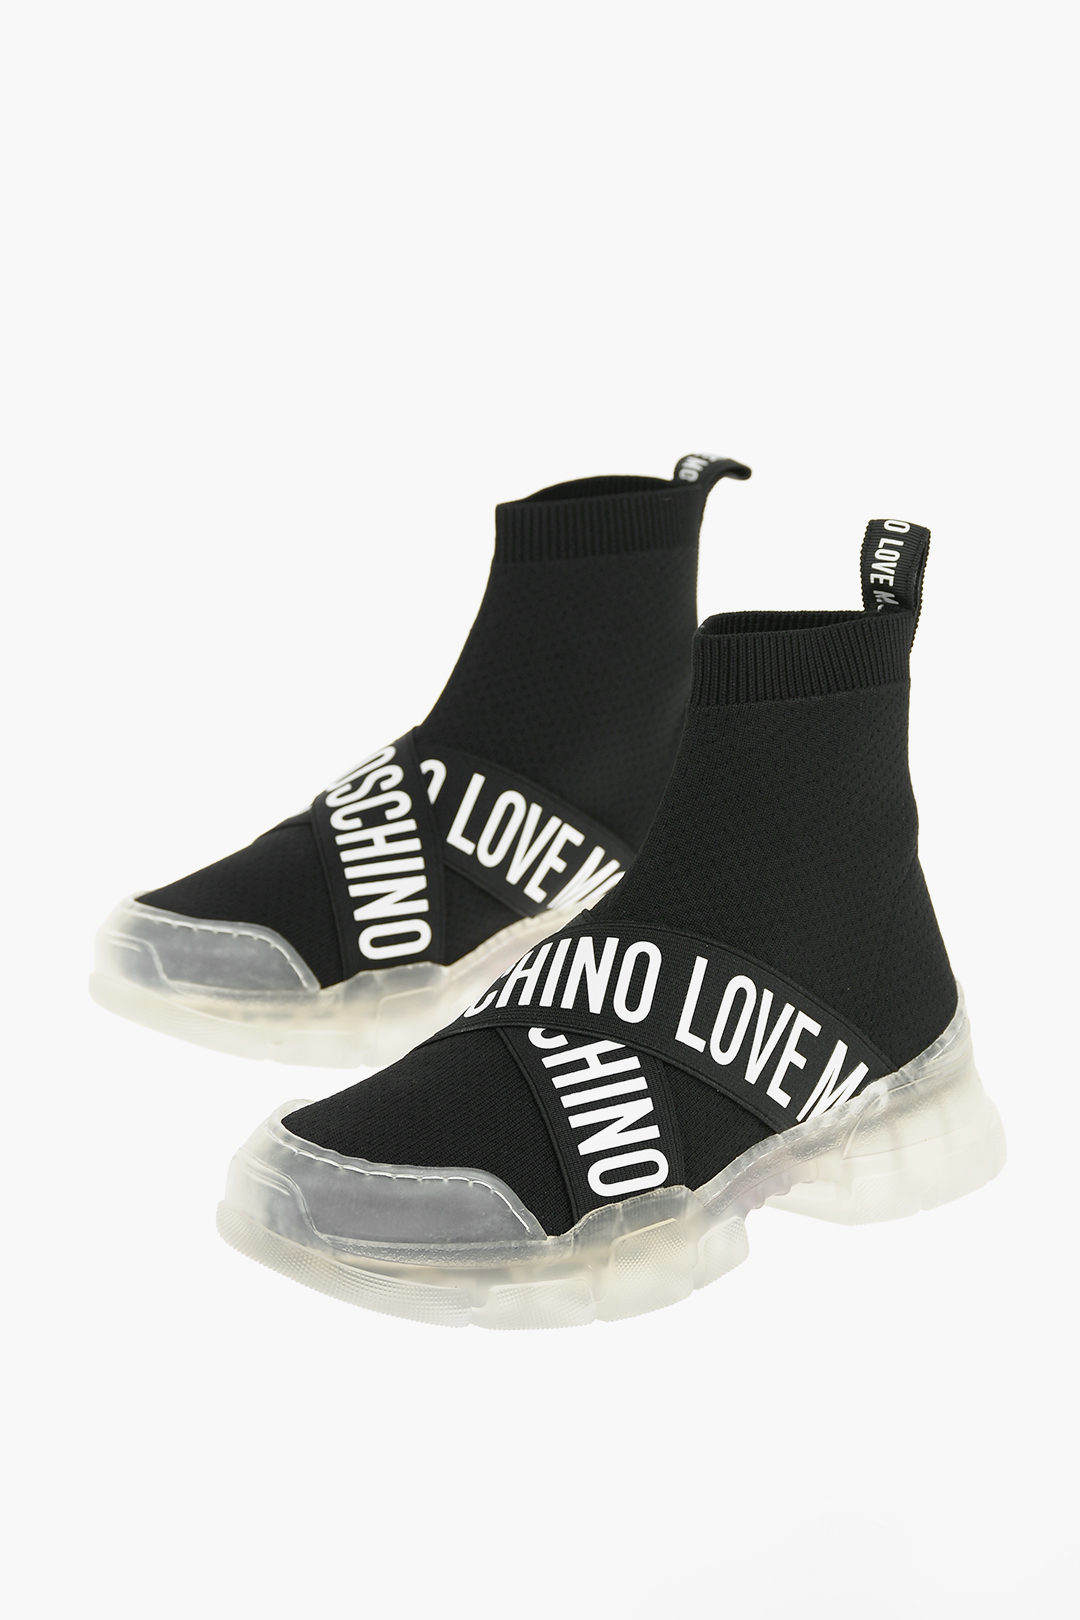 Moschino Braided Logoed TREK45 Sock Sneakers - Glamood Outlet